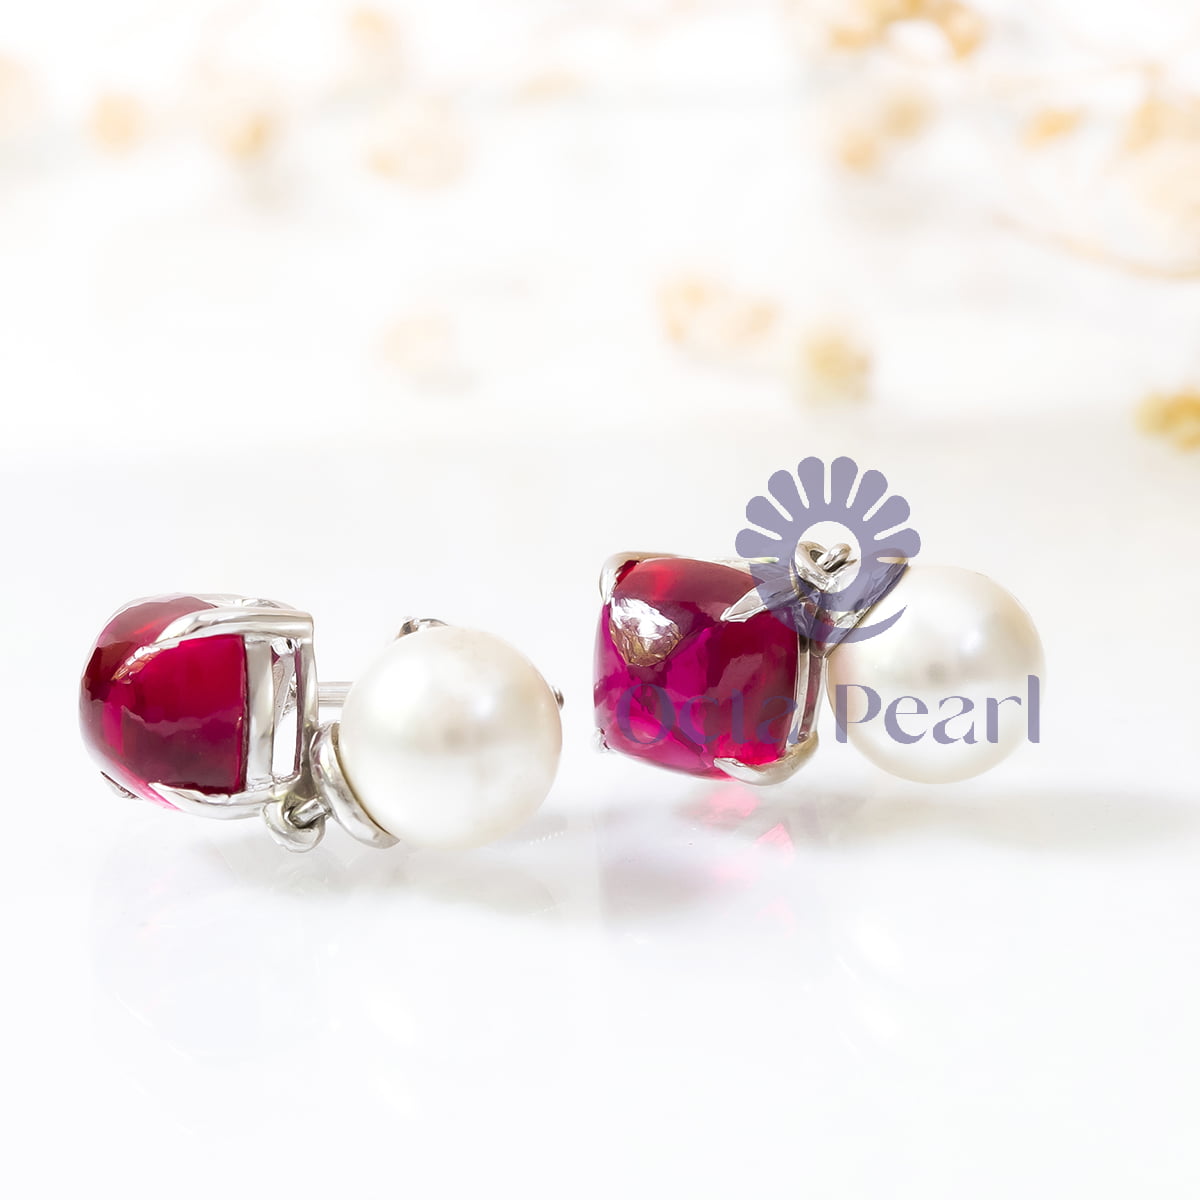 Pink Cushion Shape Cabochon With Pearl Drop Screw back Earrings For Birthday Gift